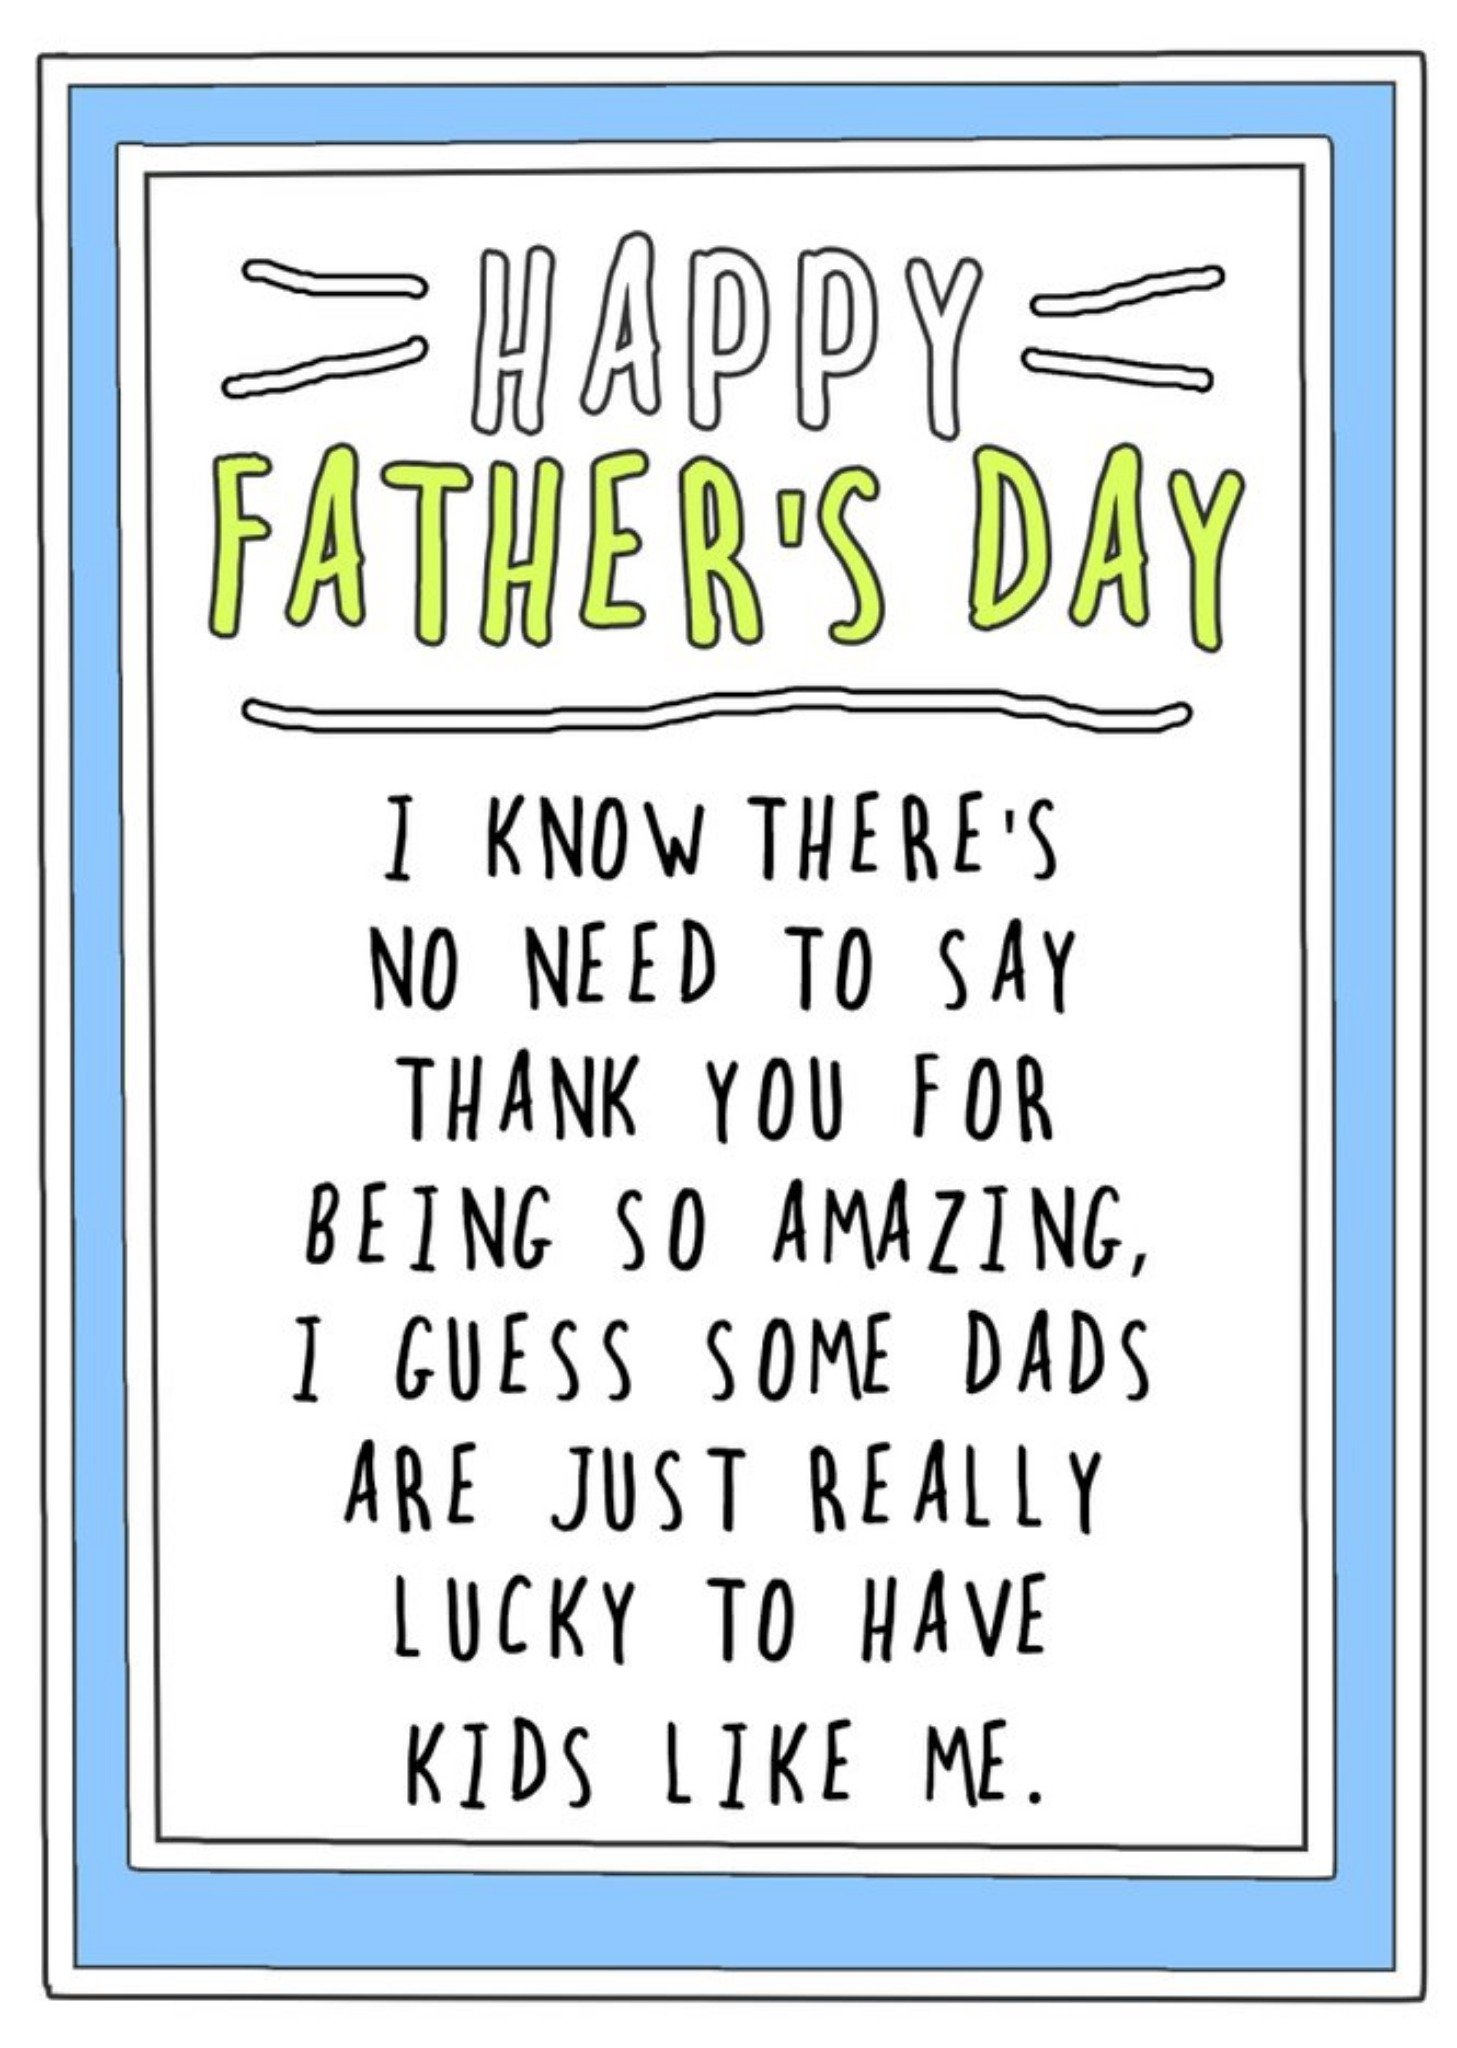 Go La La Funny Some Dads Are Really Lucky To Have Kids Like Me Father's Day Card Ecard